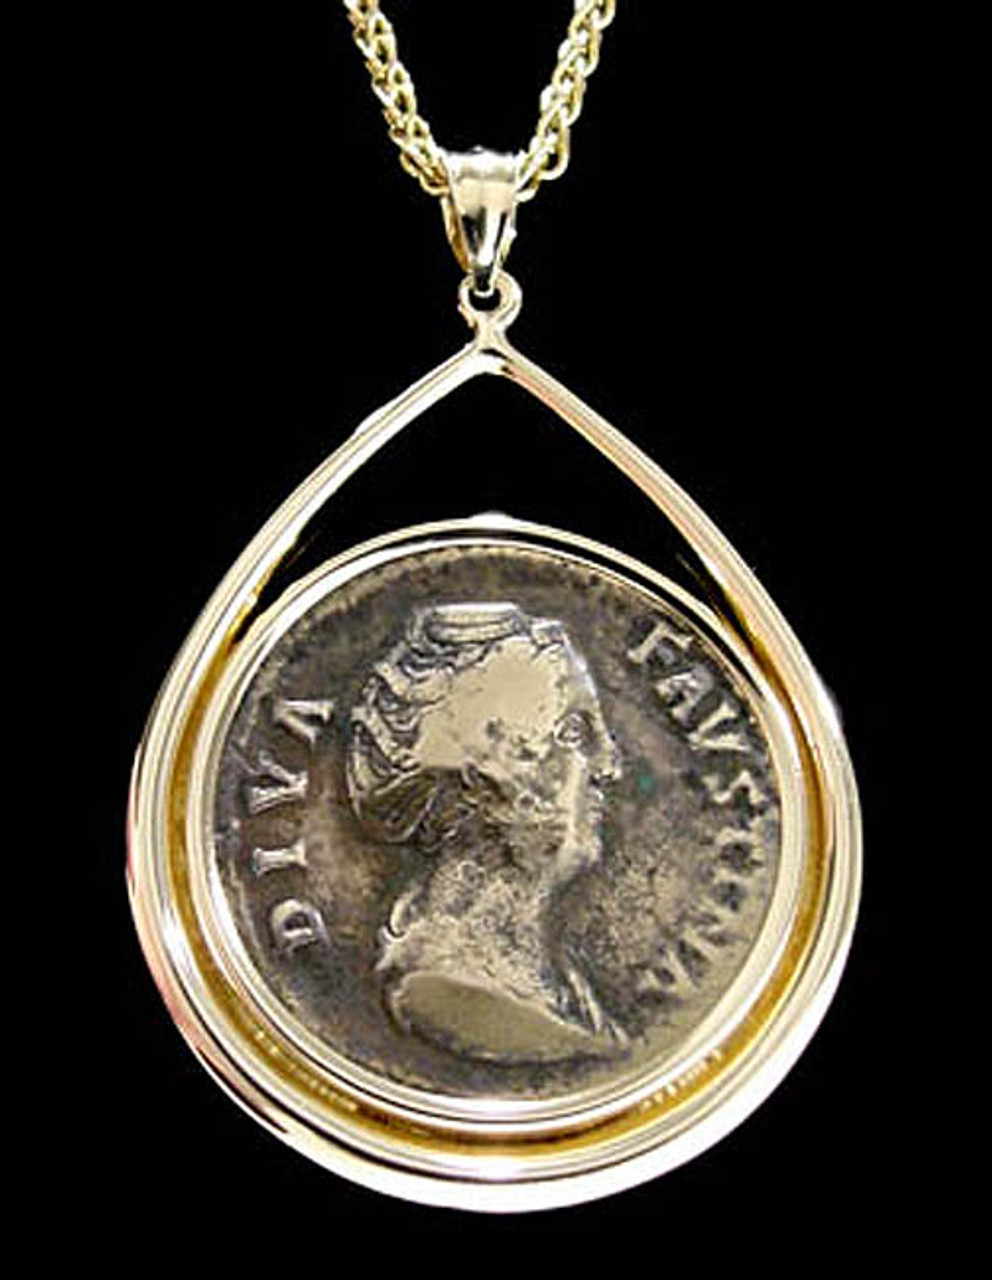 LARGE ANCIENT ROMAN SESTERTIUS COIN OF DIVA FAUSTINA IN 14K GOLD PENDANT  *CPR027